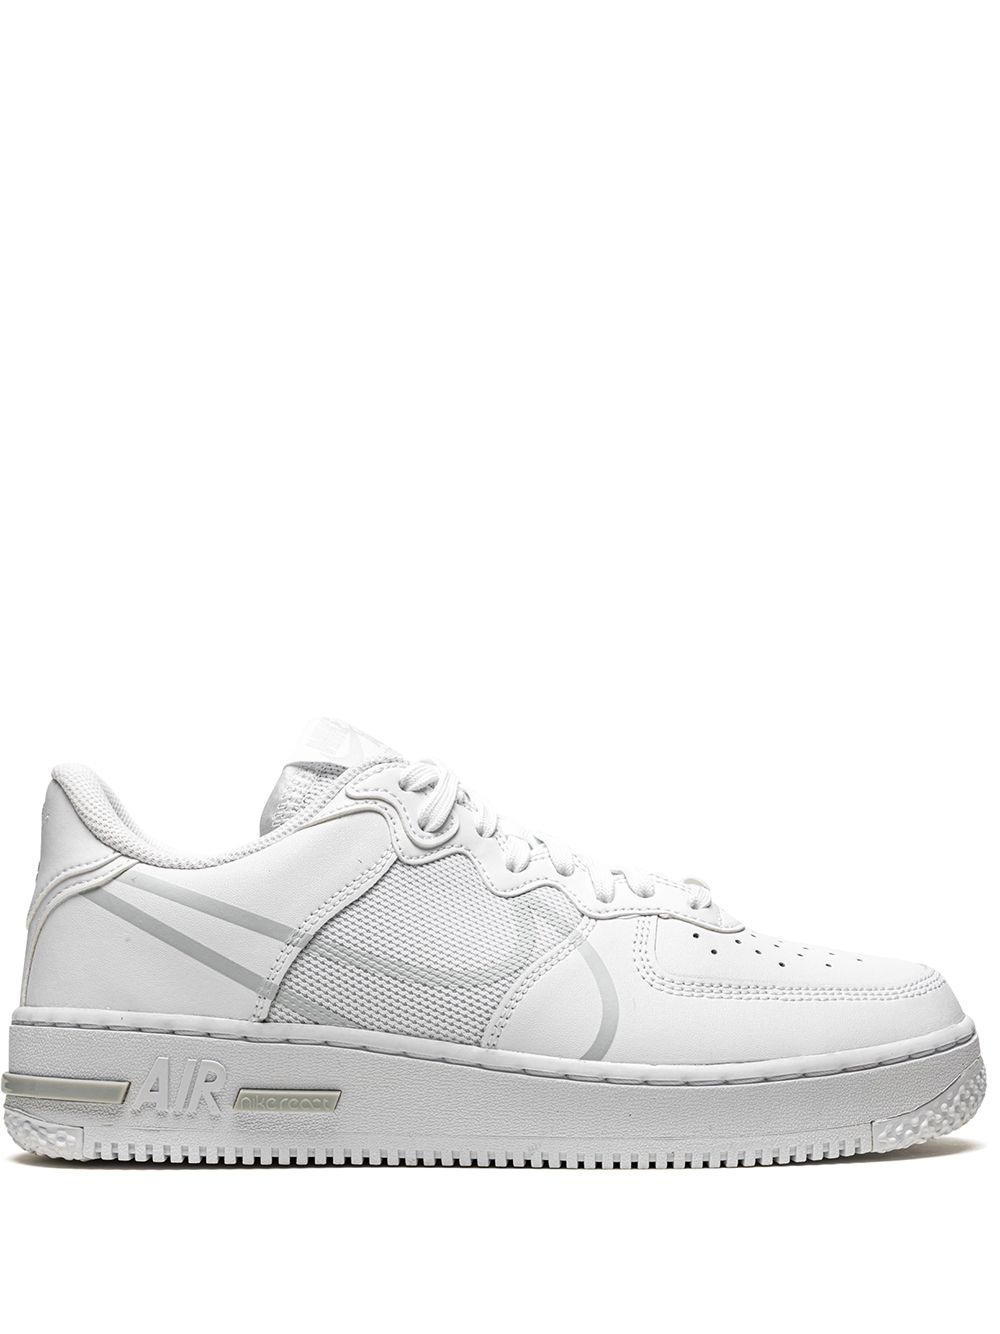 Air Force 1 Low React "White" sneakers - 1